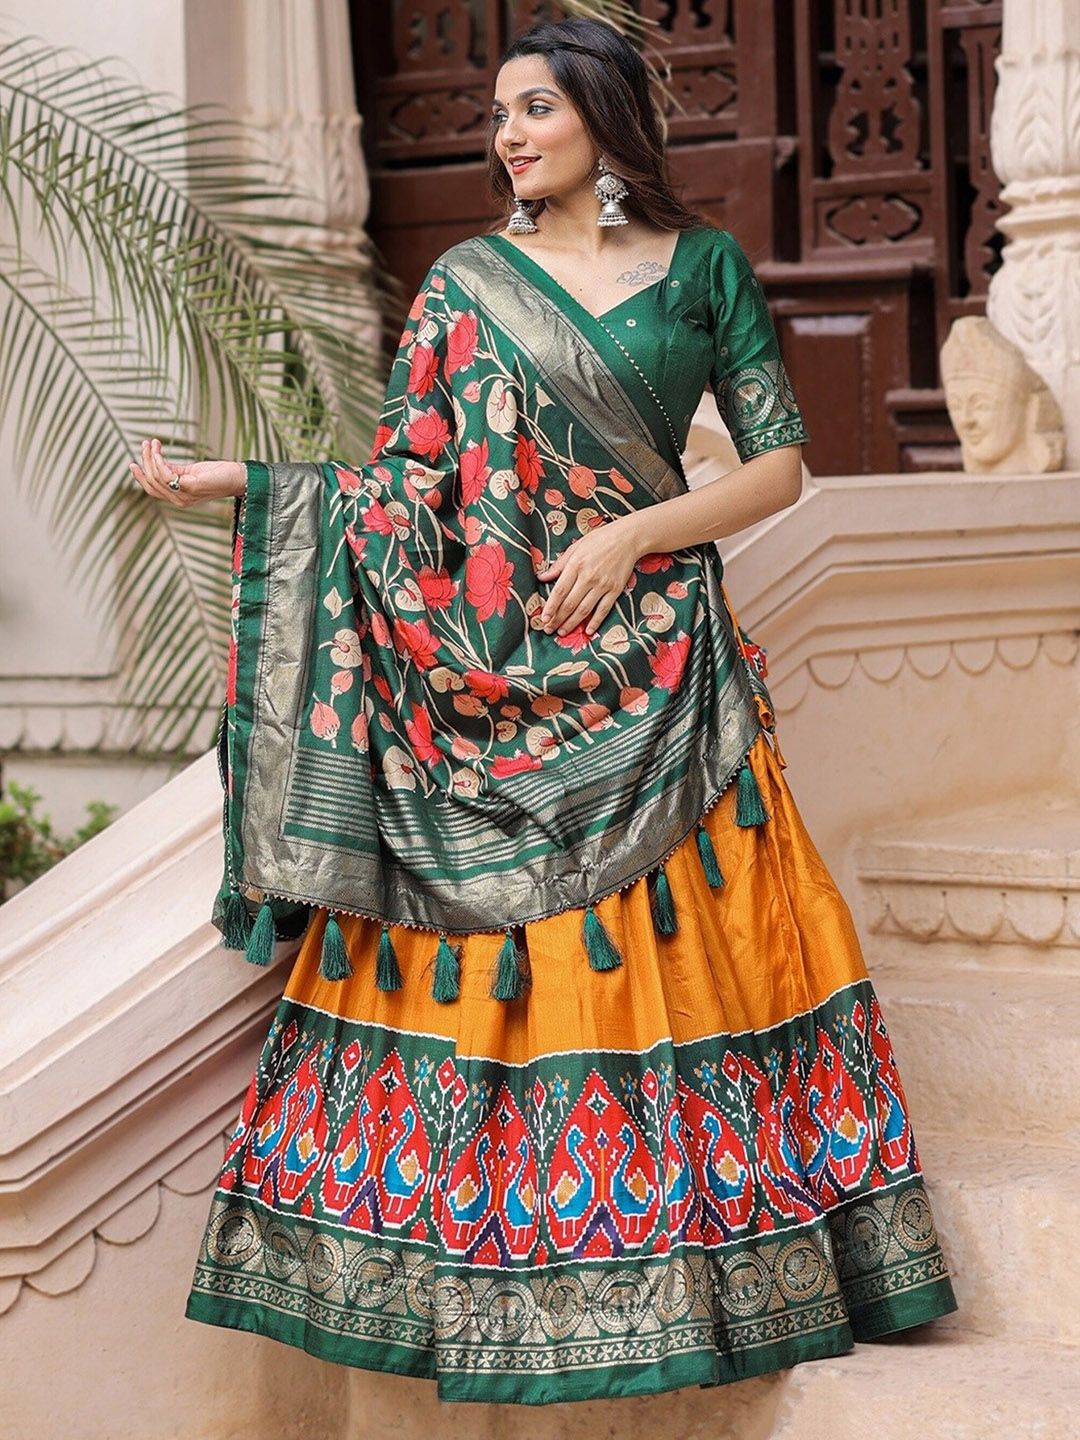 UDBHAV TEXTILE Foil Printed Semi-Stitched Lehenga & Unstitched Blouse With Dupatta Price in India